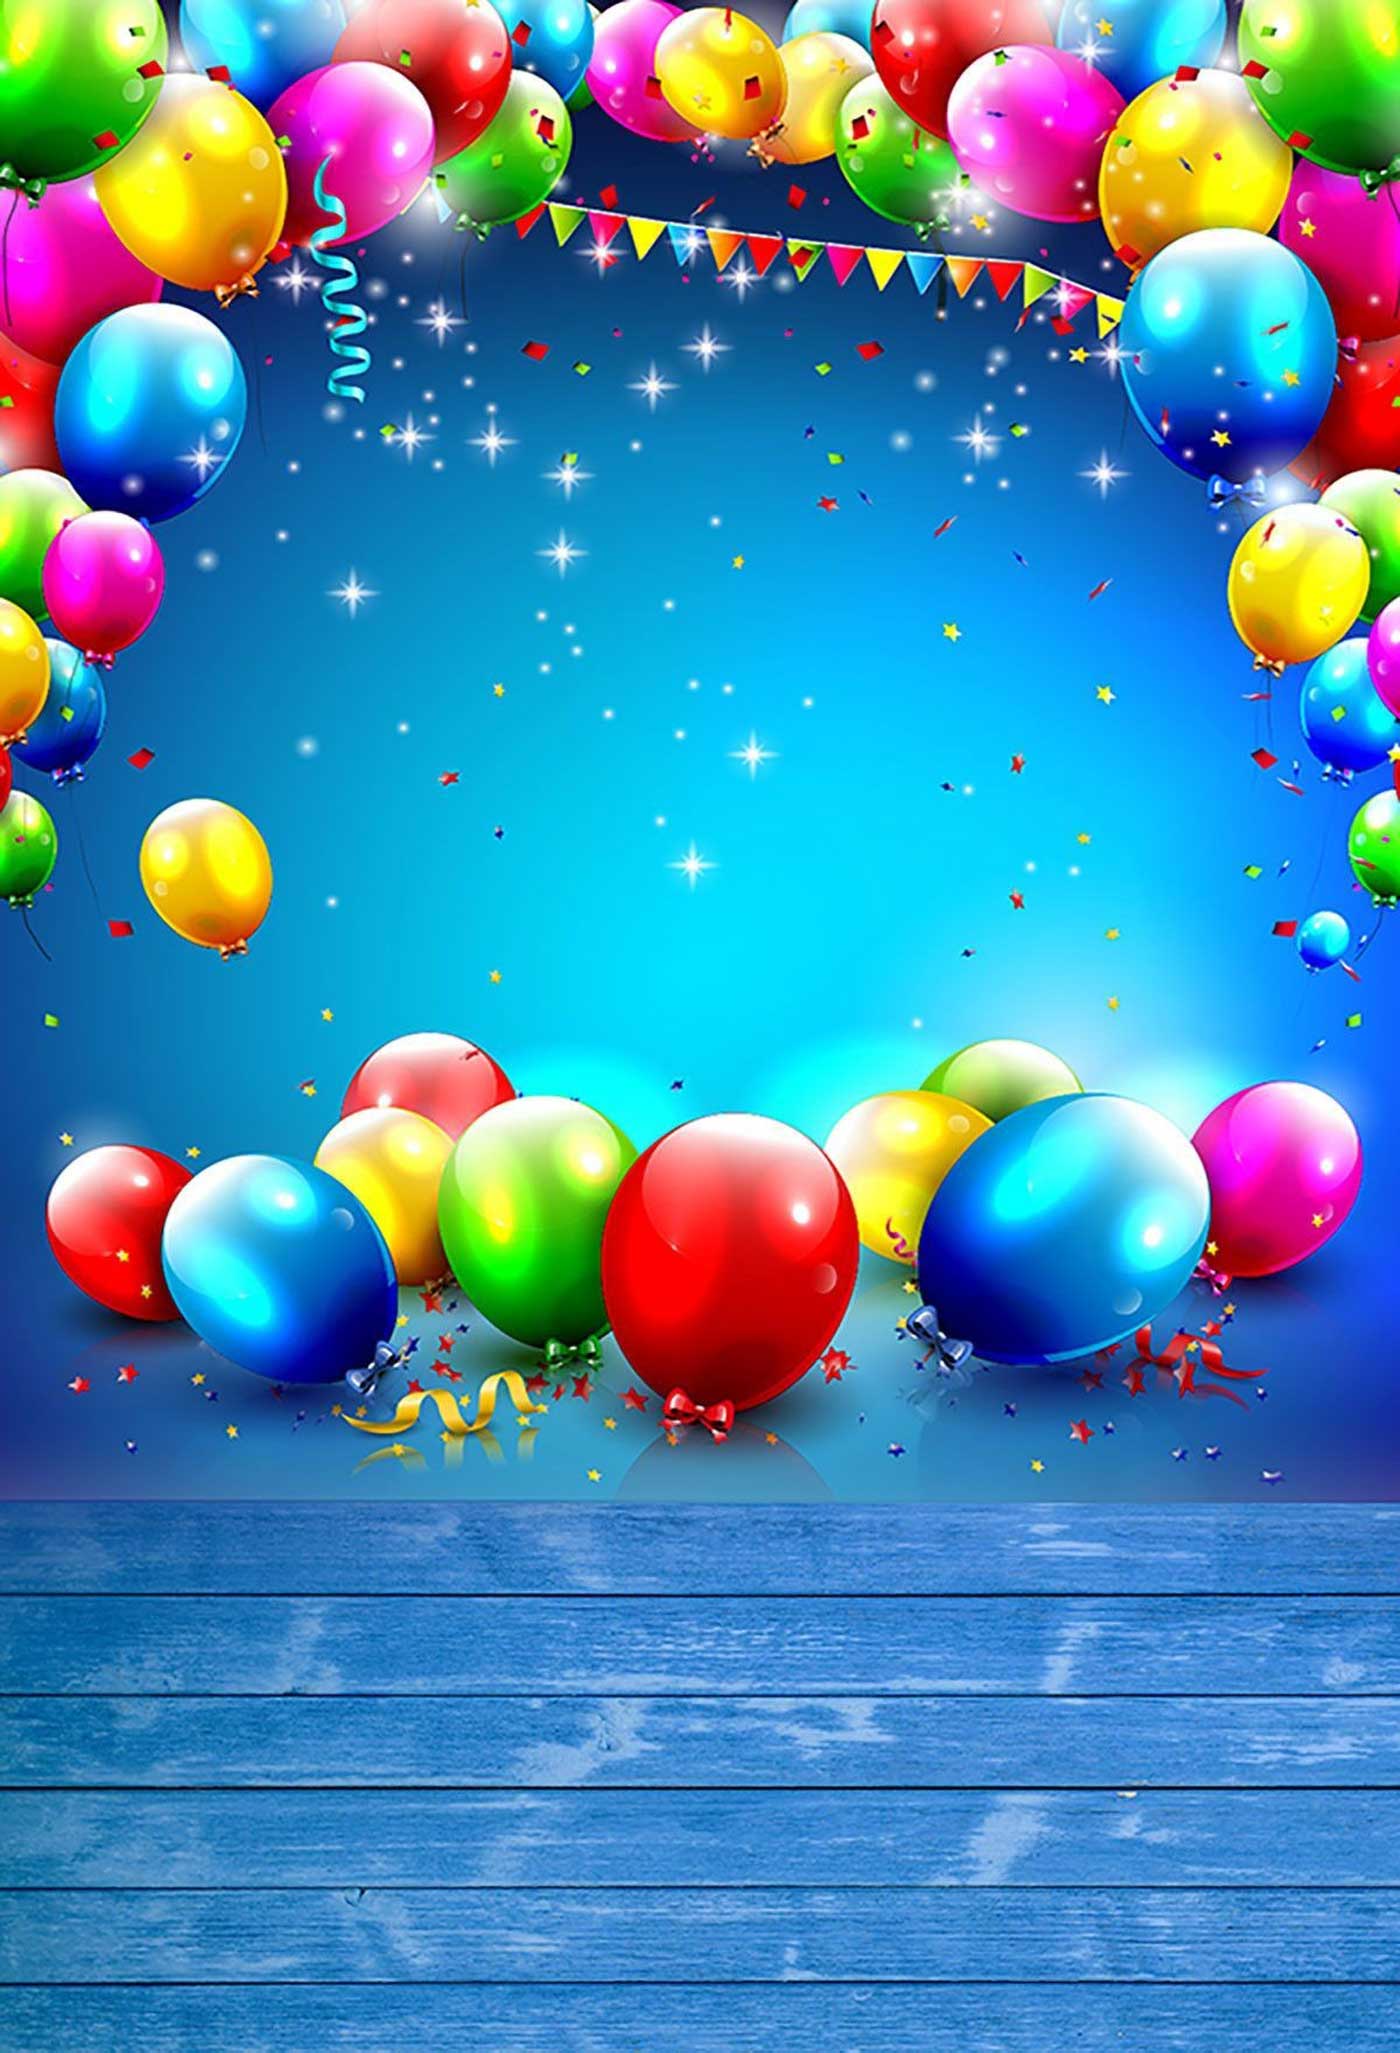 600 Happy Birthday Background Full HD For Photo Editing